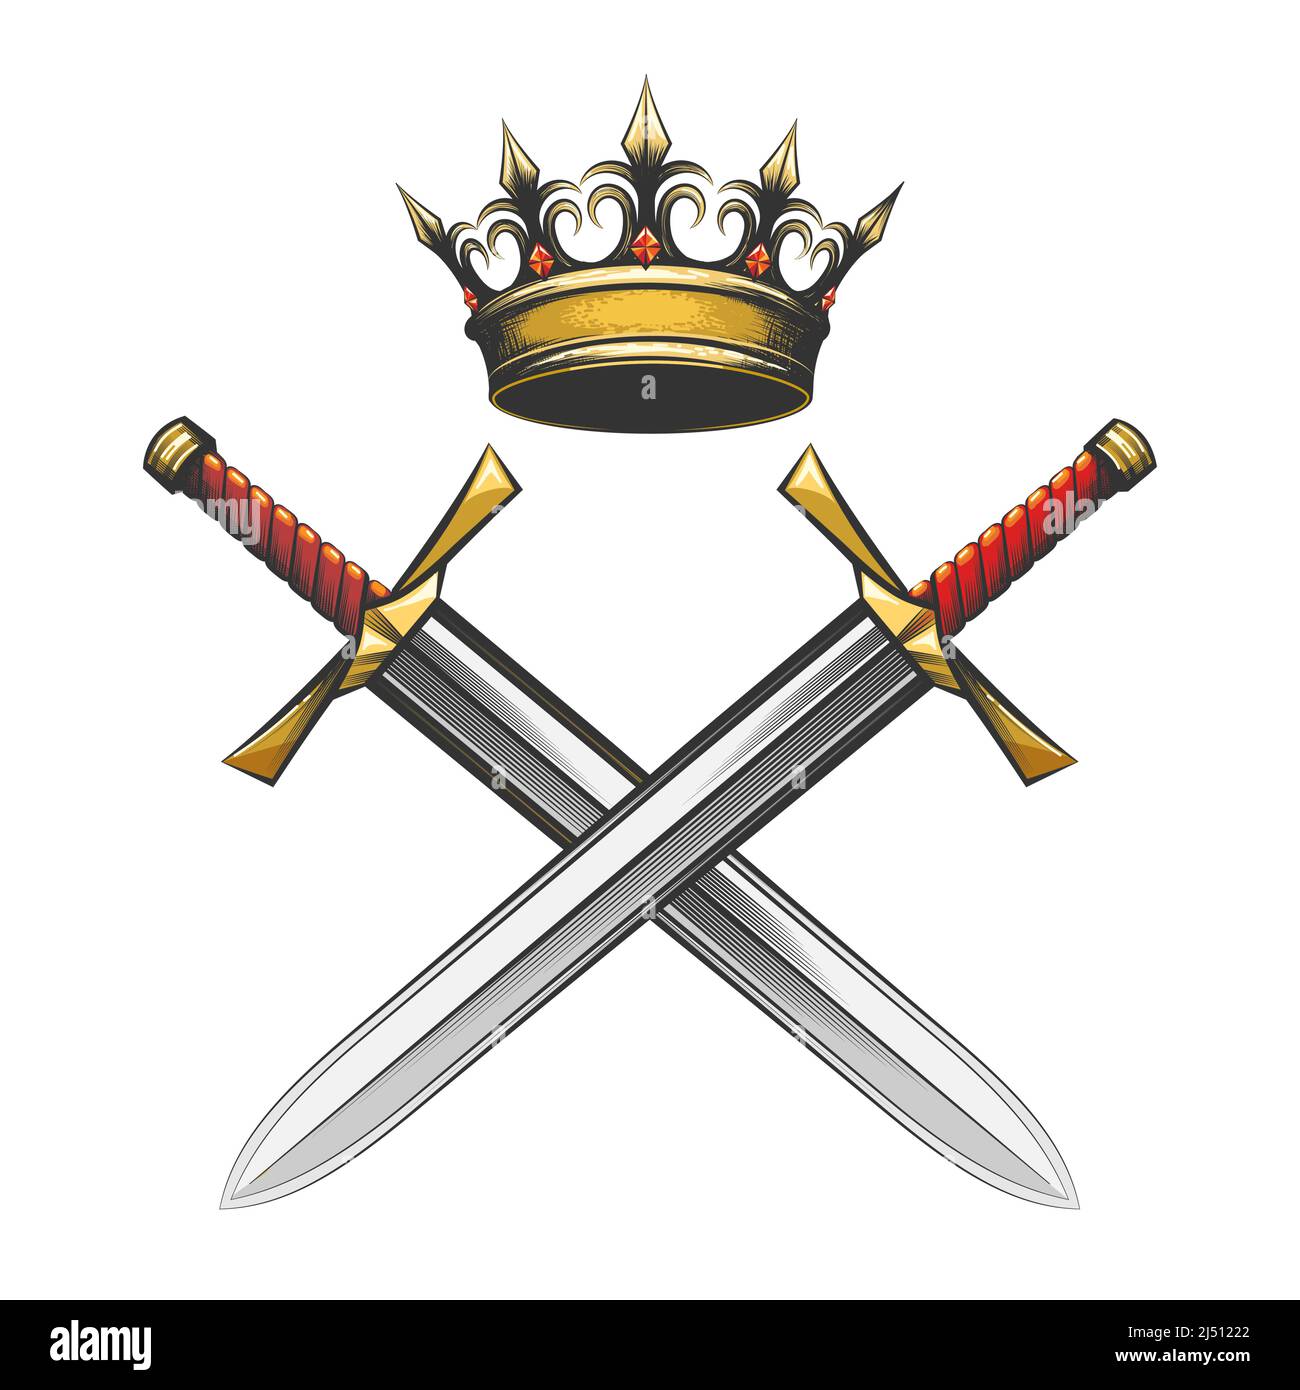 Emblem of Crown and Swords drawn in engraving style isolated on white. Vector illustration. Stock Vector